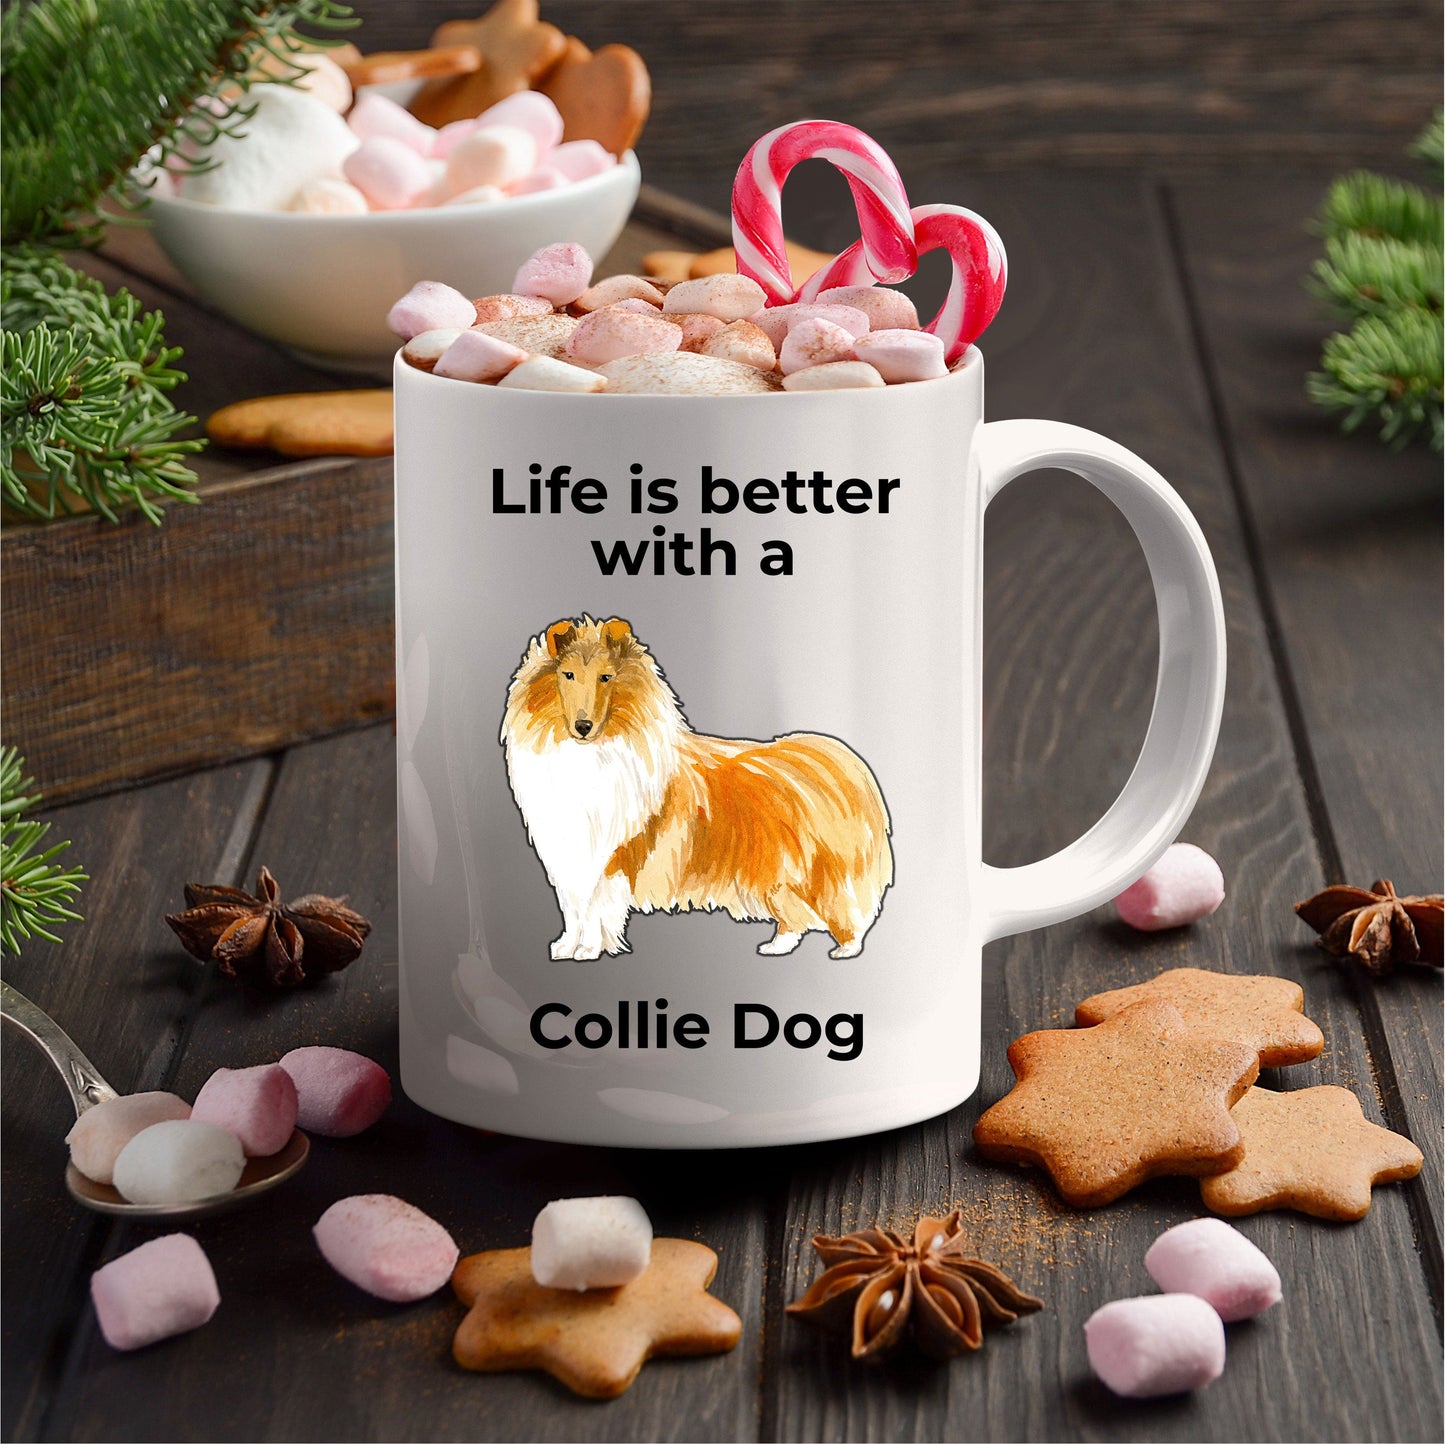 Collie Dog Lover Coffee Mug Life is better with a Collie Dog